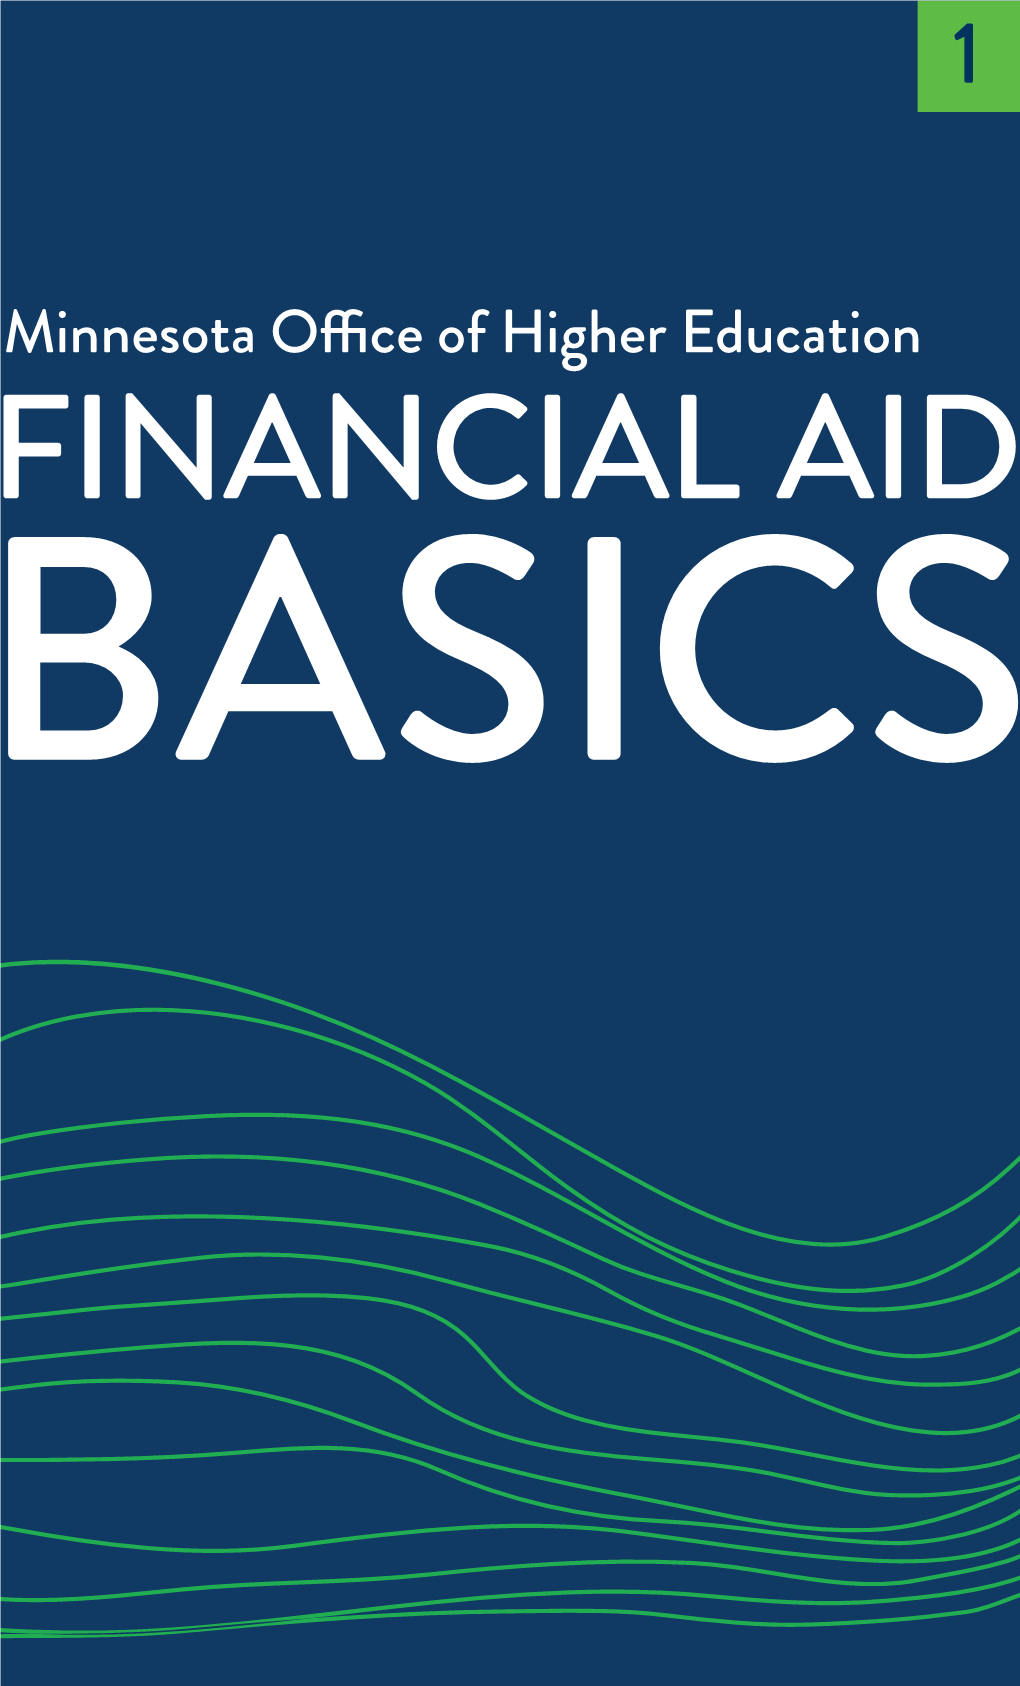 FINANCIAL AID BASICS How Do I Pay for College? If You Think You Can’T Afford to Go to College, Think Again